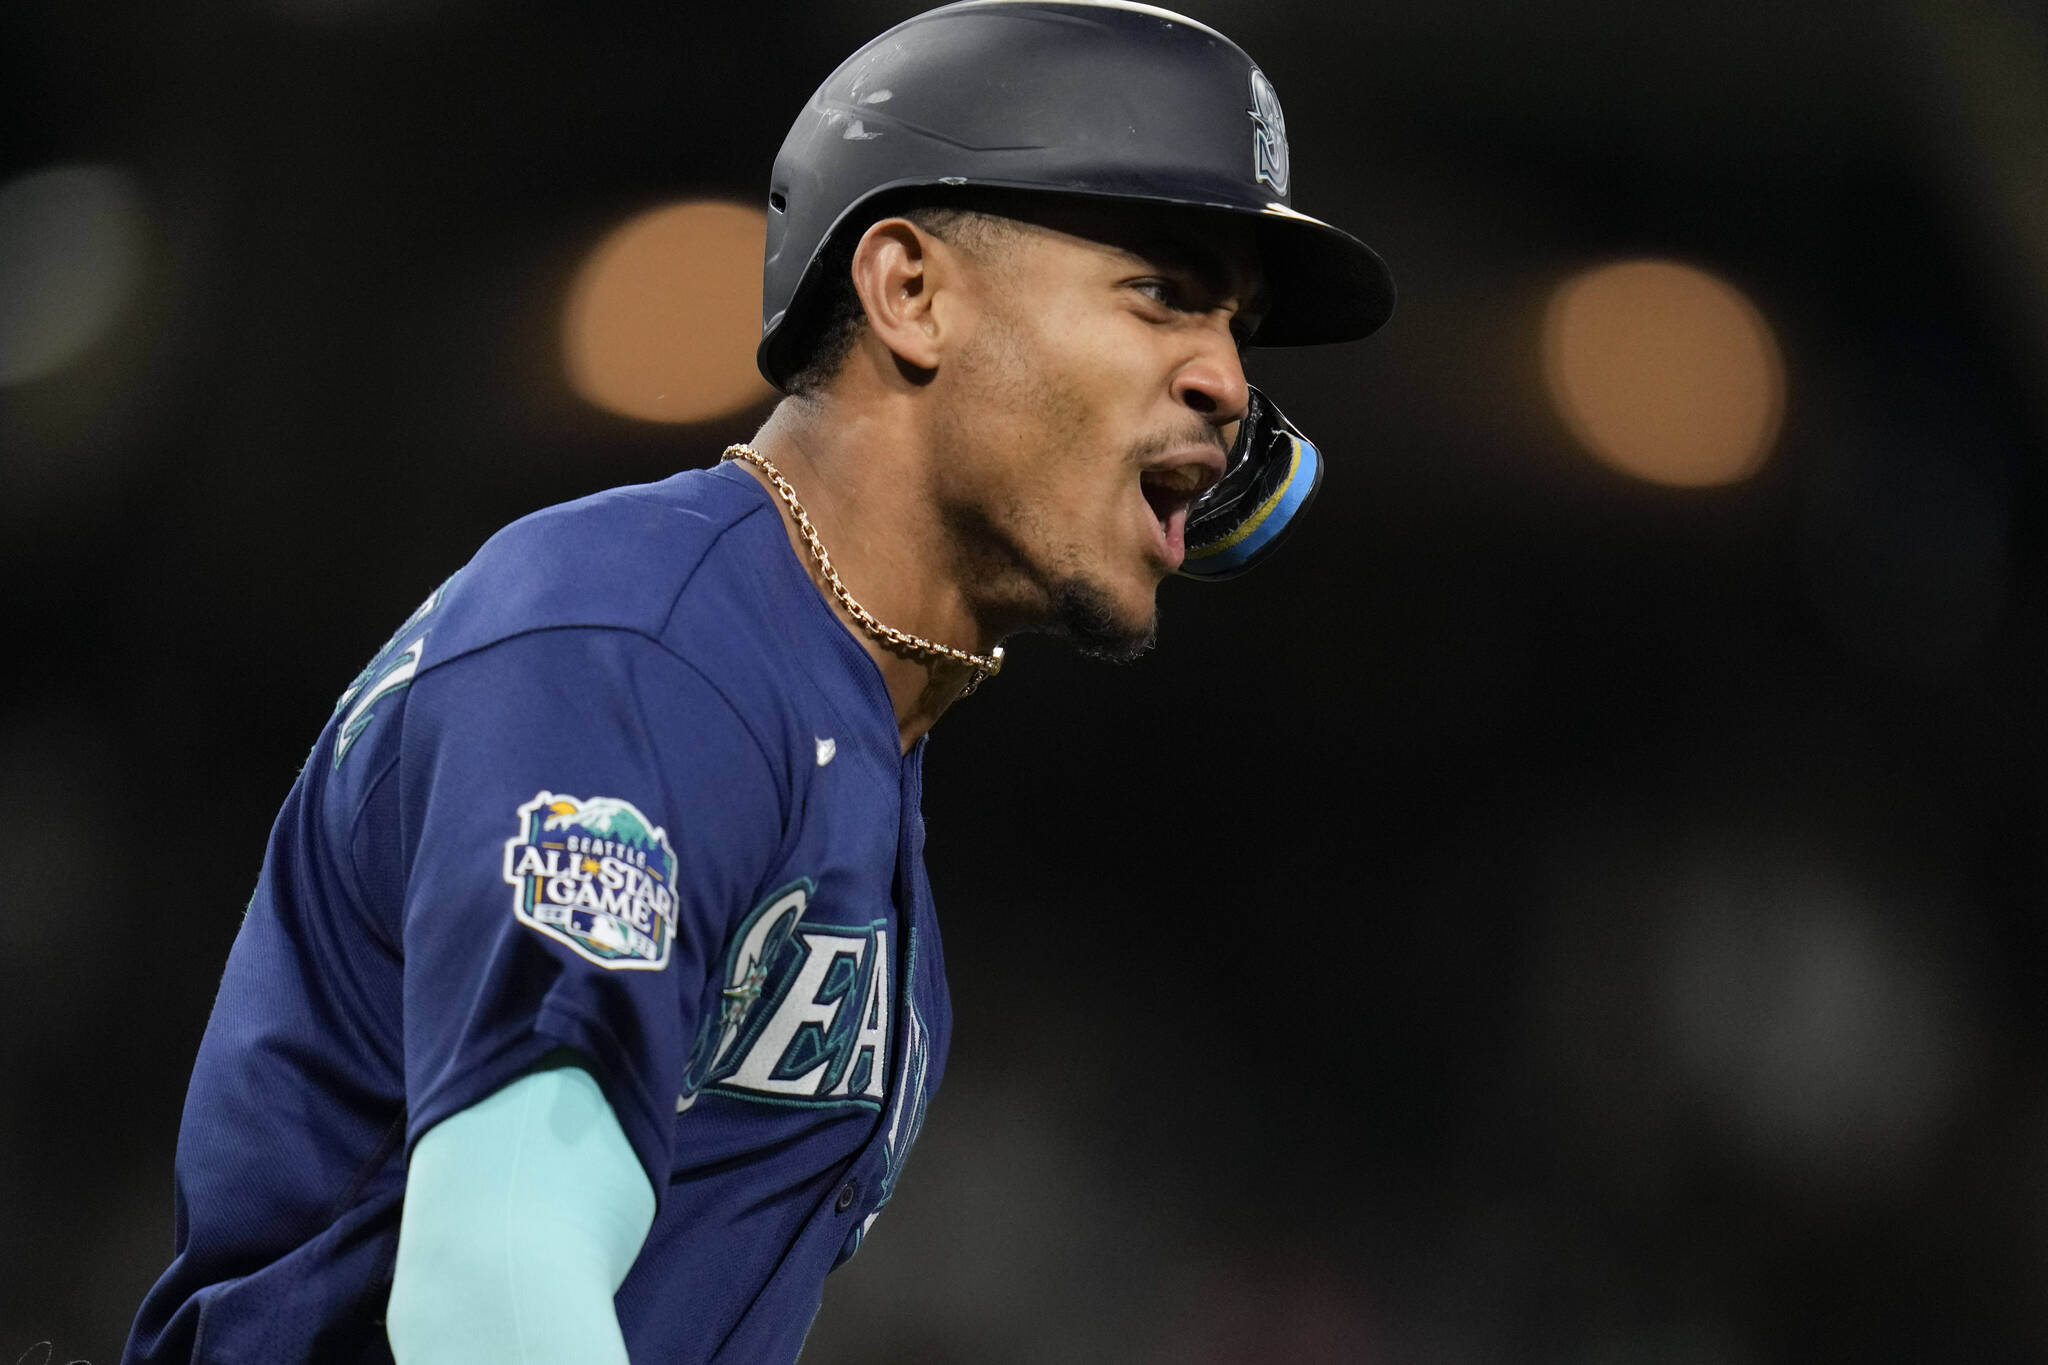 The Mariners’ Julio Rodriguez reacts after hitting a home run during the eighth inning of a game against the Padres on Tuesday in San Diego. (AP Photo/Gregory Bull)